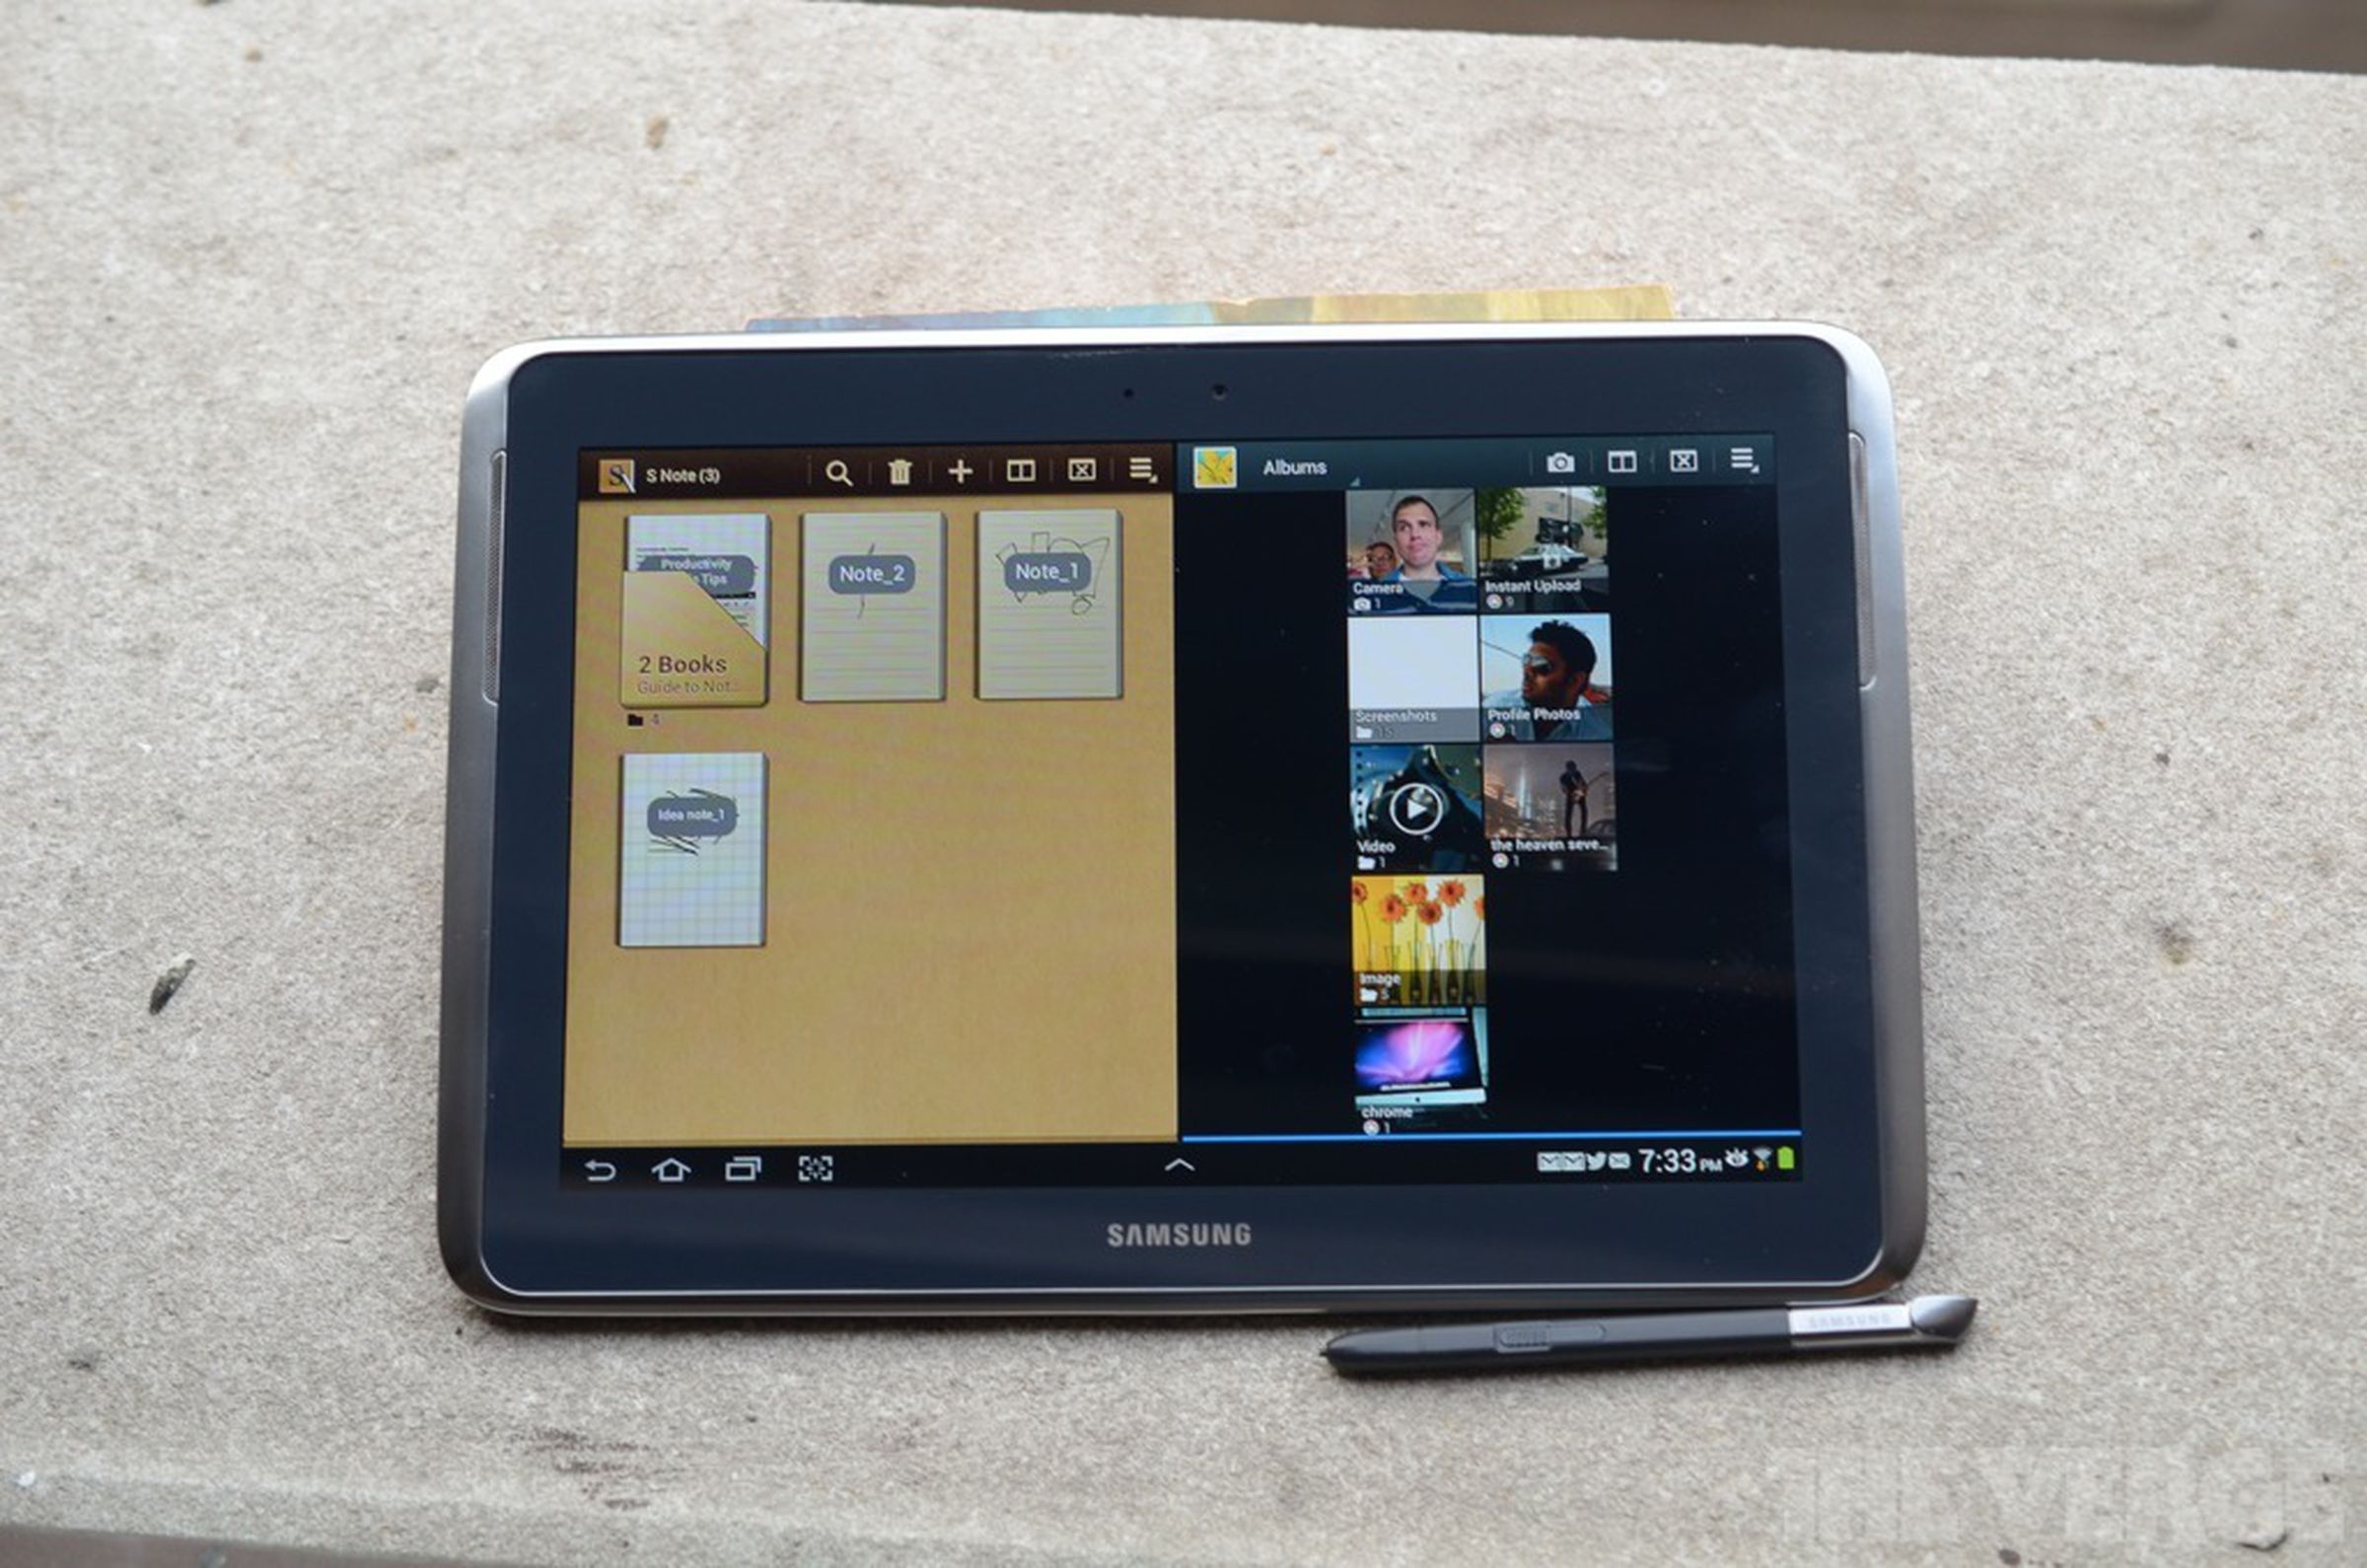 Samsung Galaxy Note 10.1 pictures